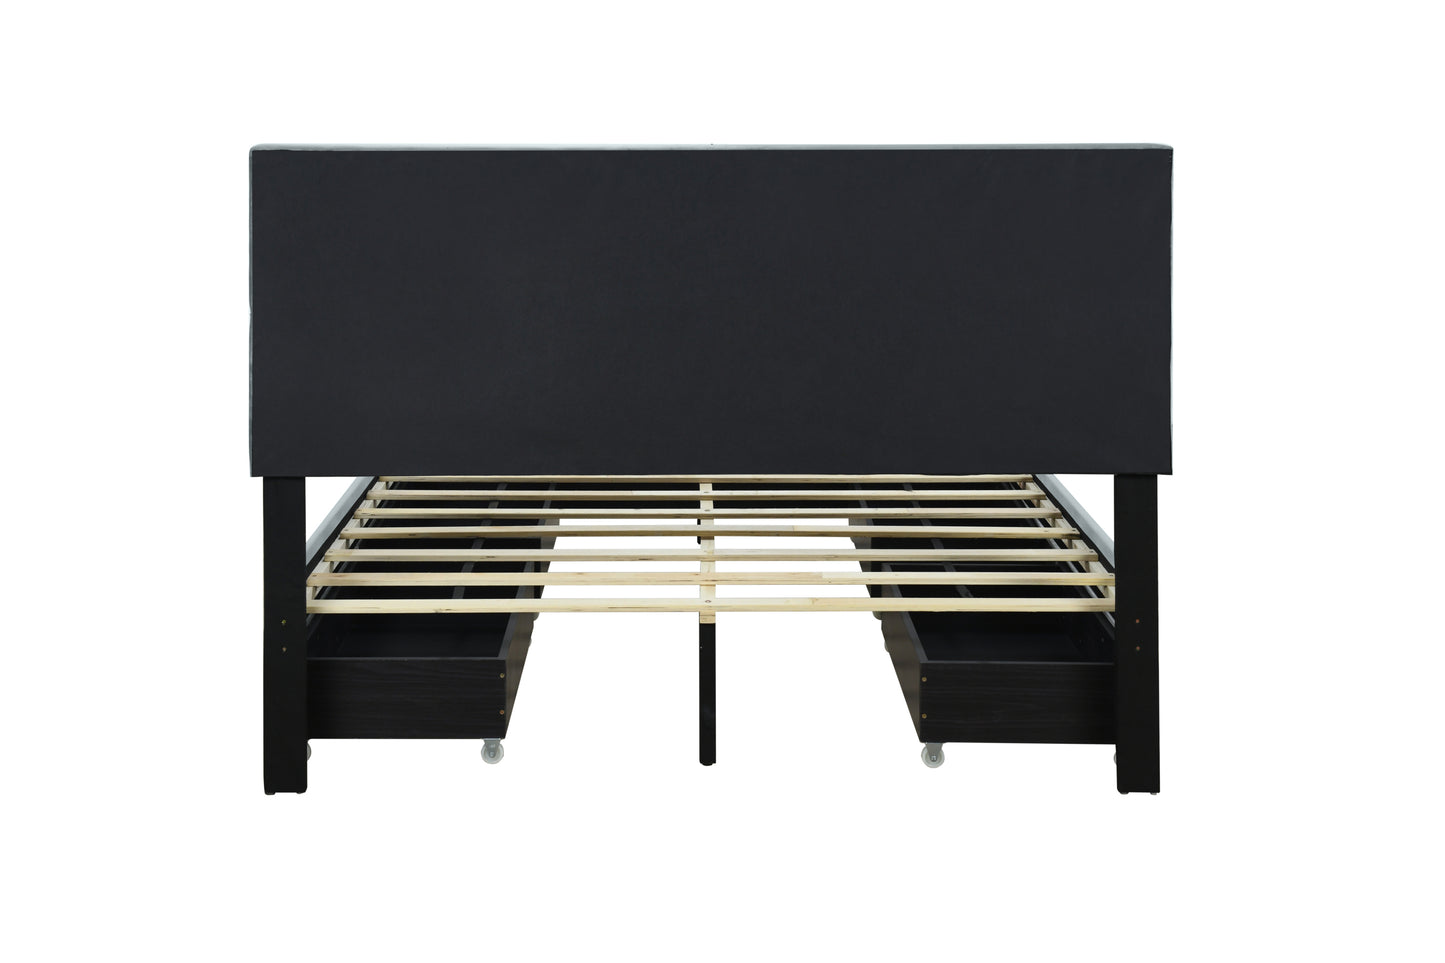 Queen Size Upholstered Platform Bed with Rivet-decorated Headboard, LED bed frame and 4 Drawers, Gray